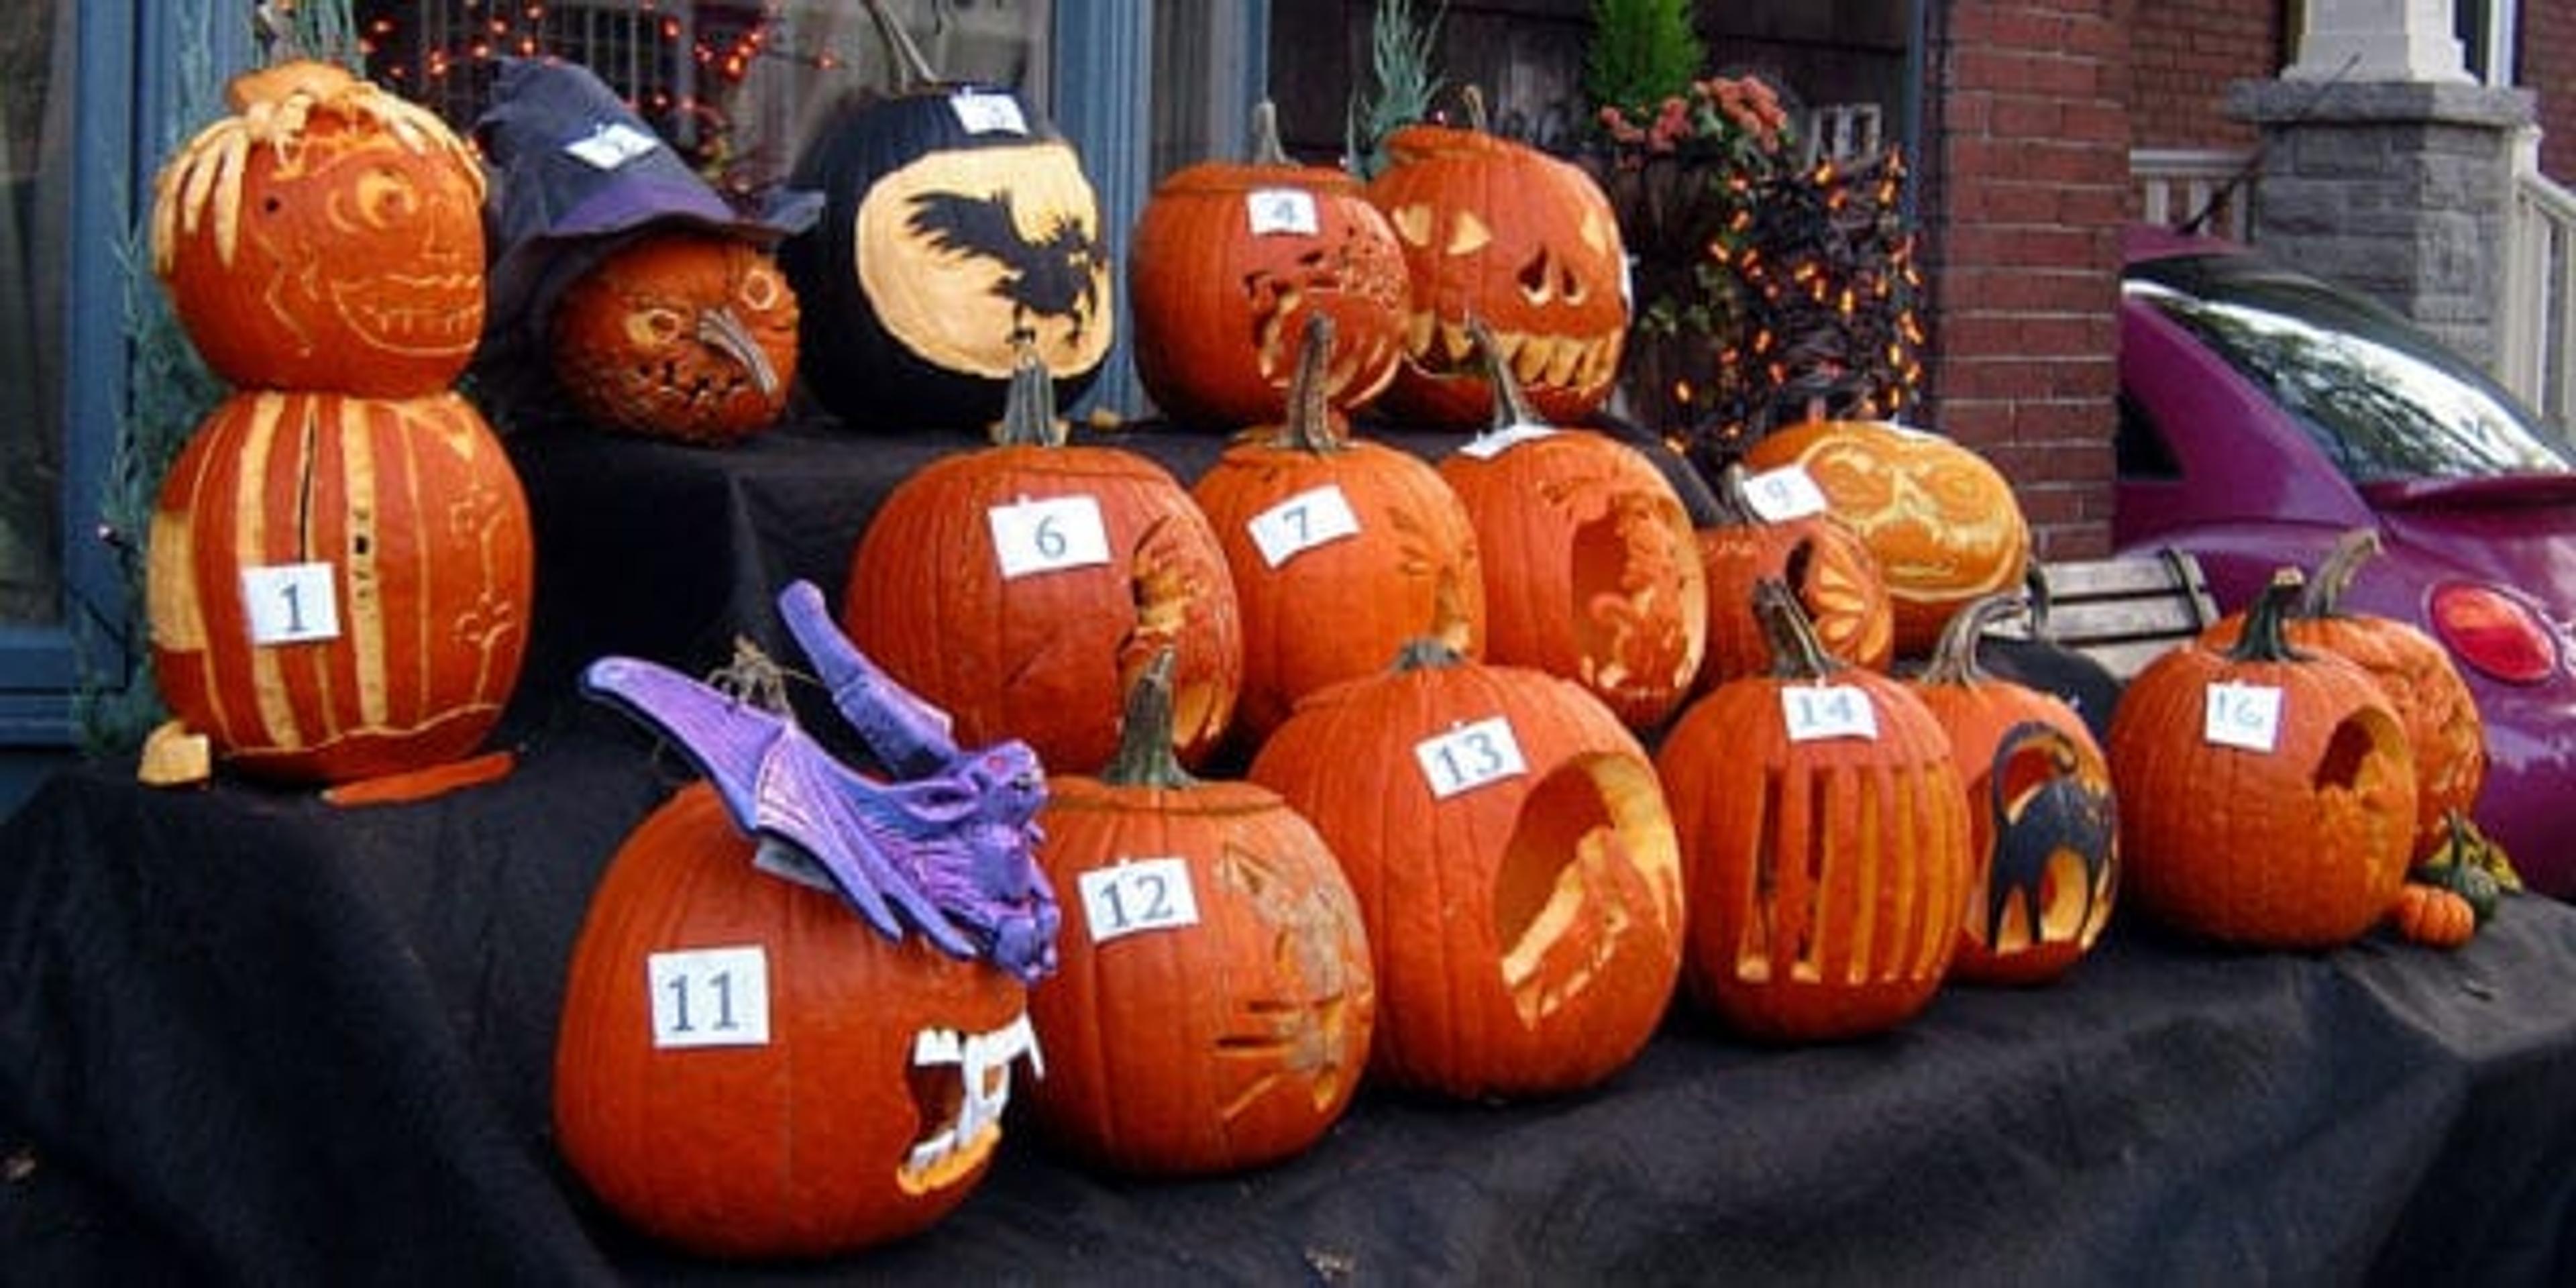 Crafty pumpkins lined up for judging.